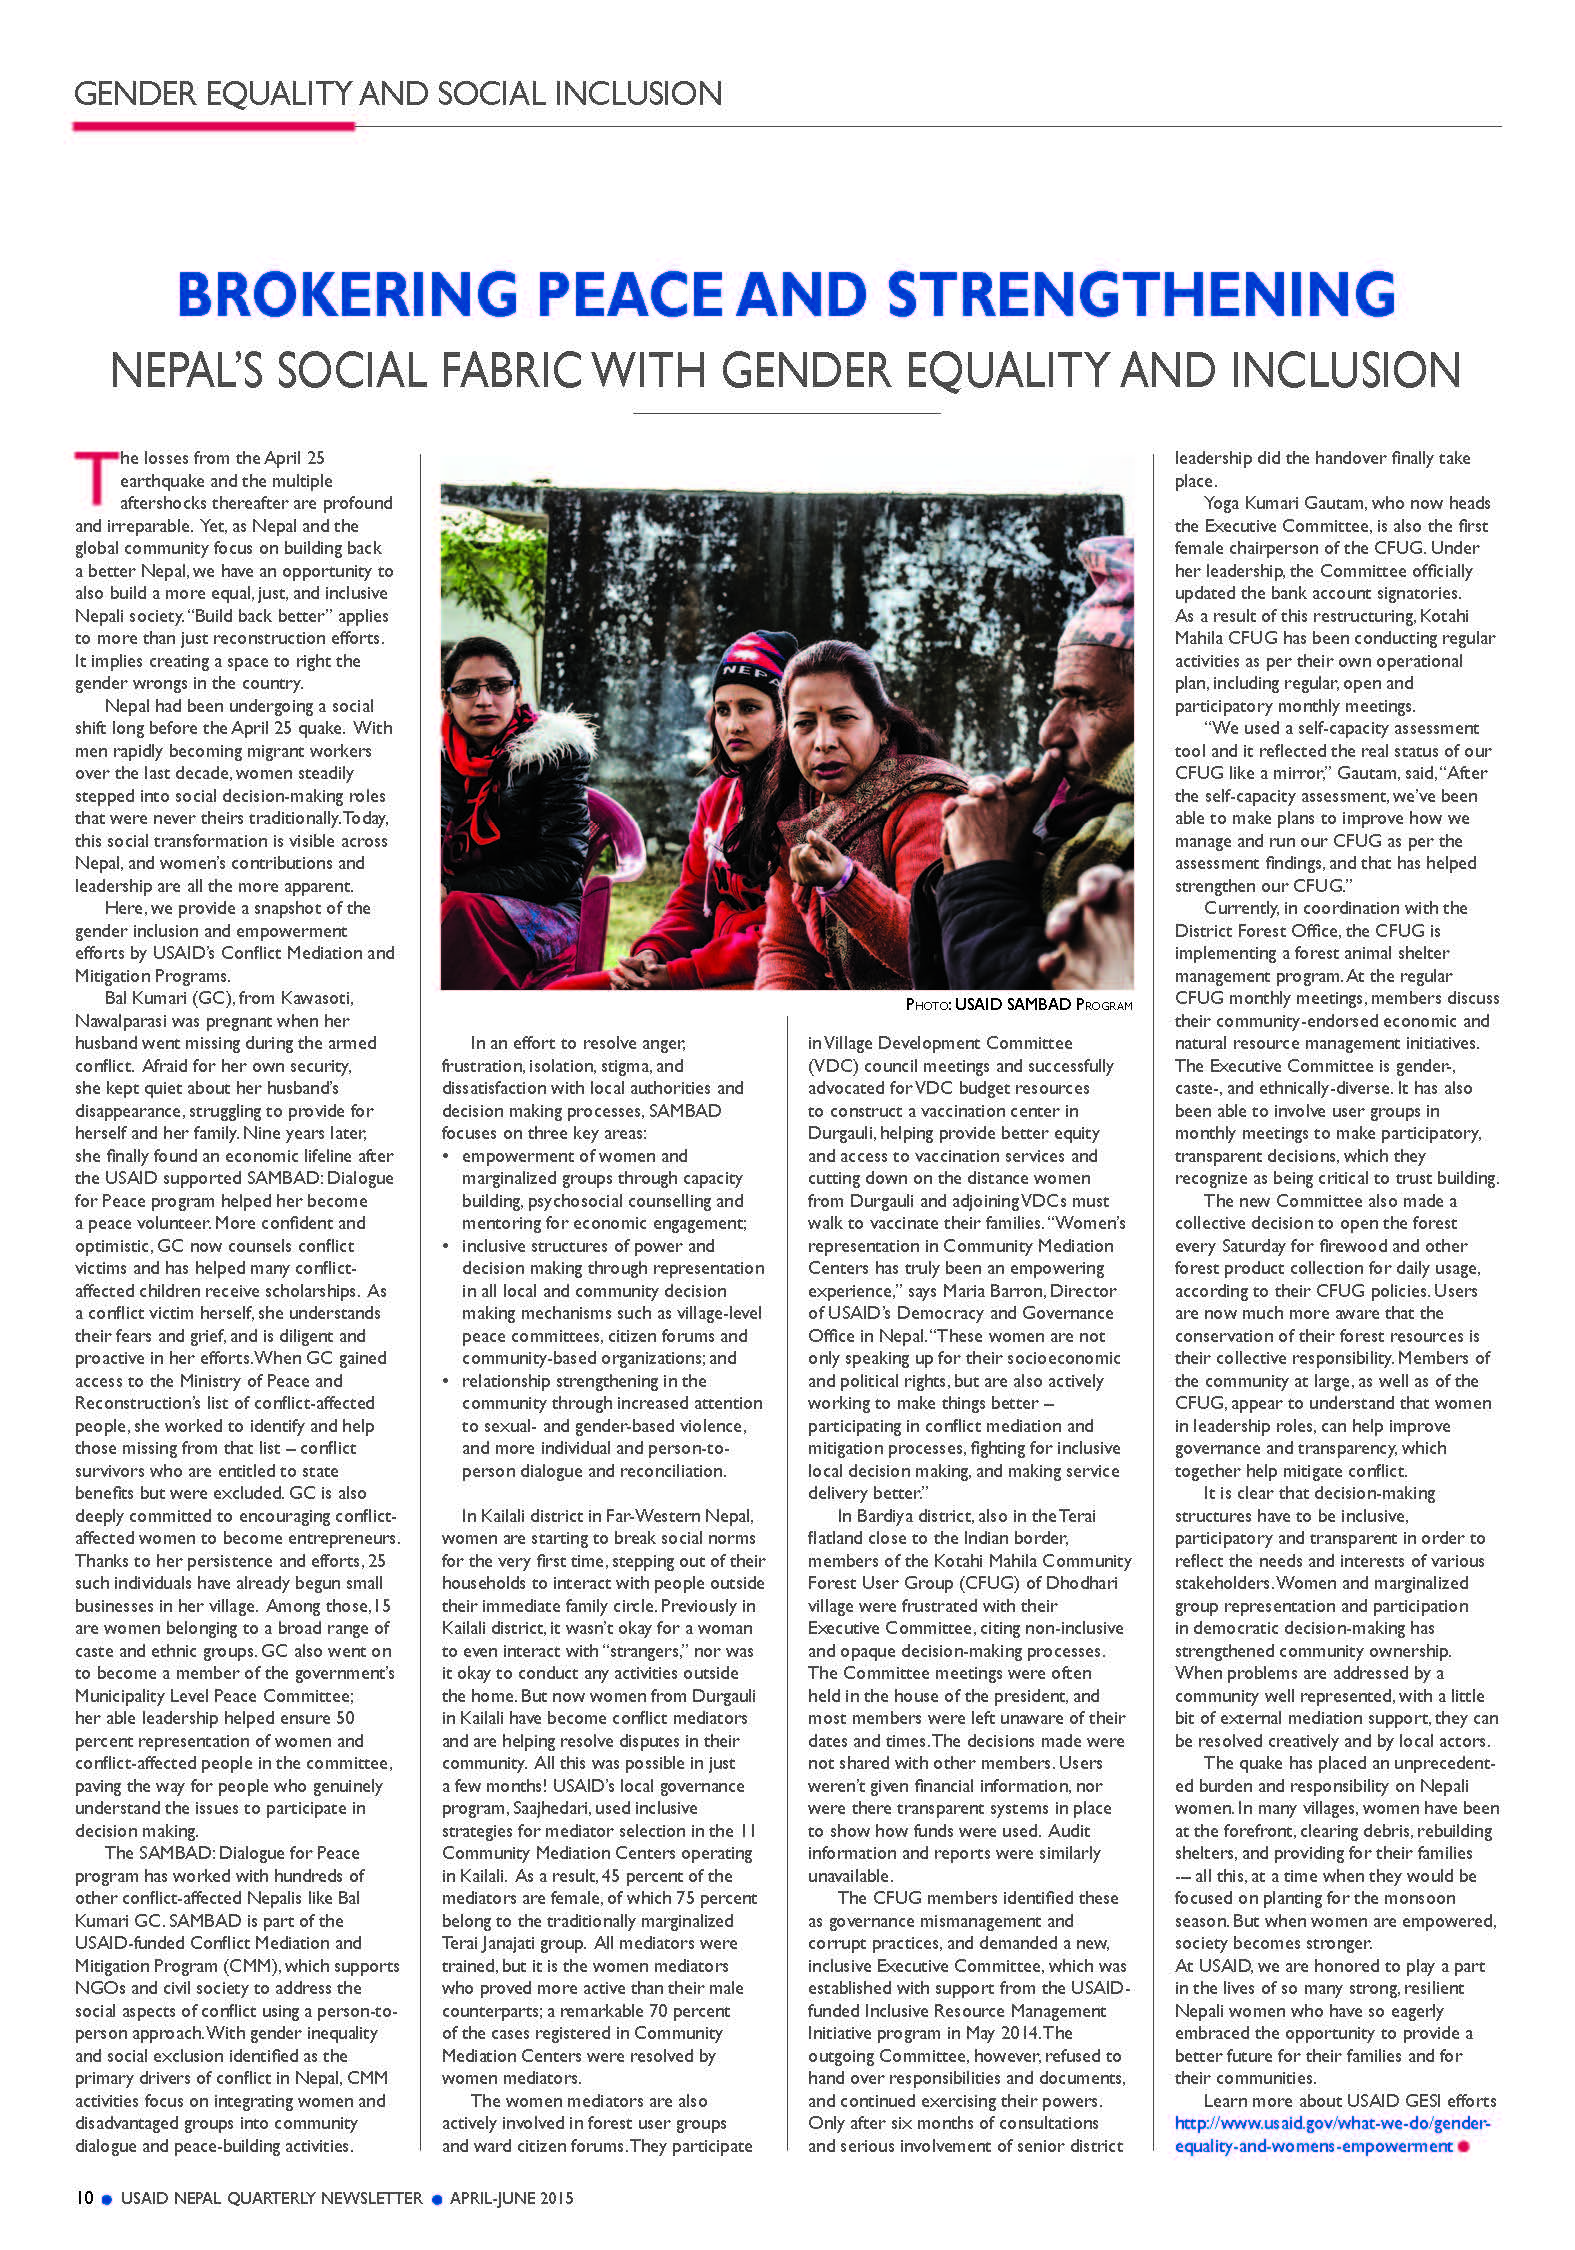 BROKERING-PEACE-AND-STRENGTHENING: NEPAL’S SOCIAL FABRIC WITH GENDER EQUALITY AND INCLUSION